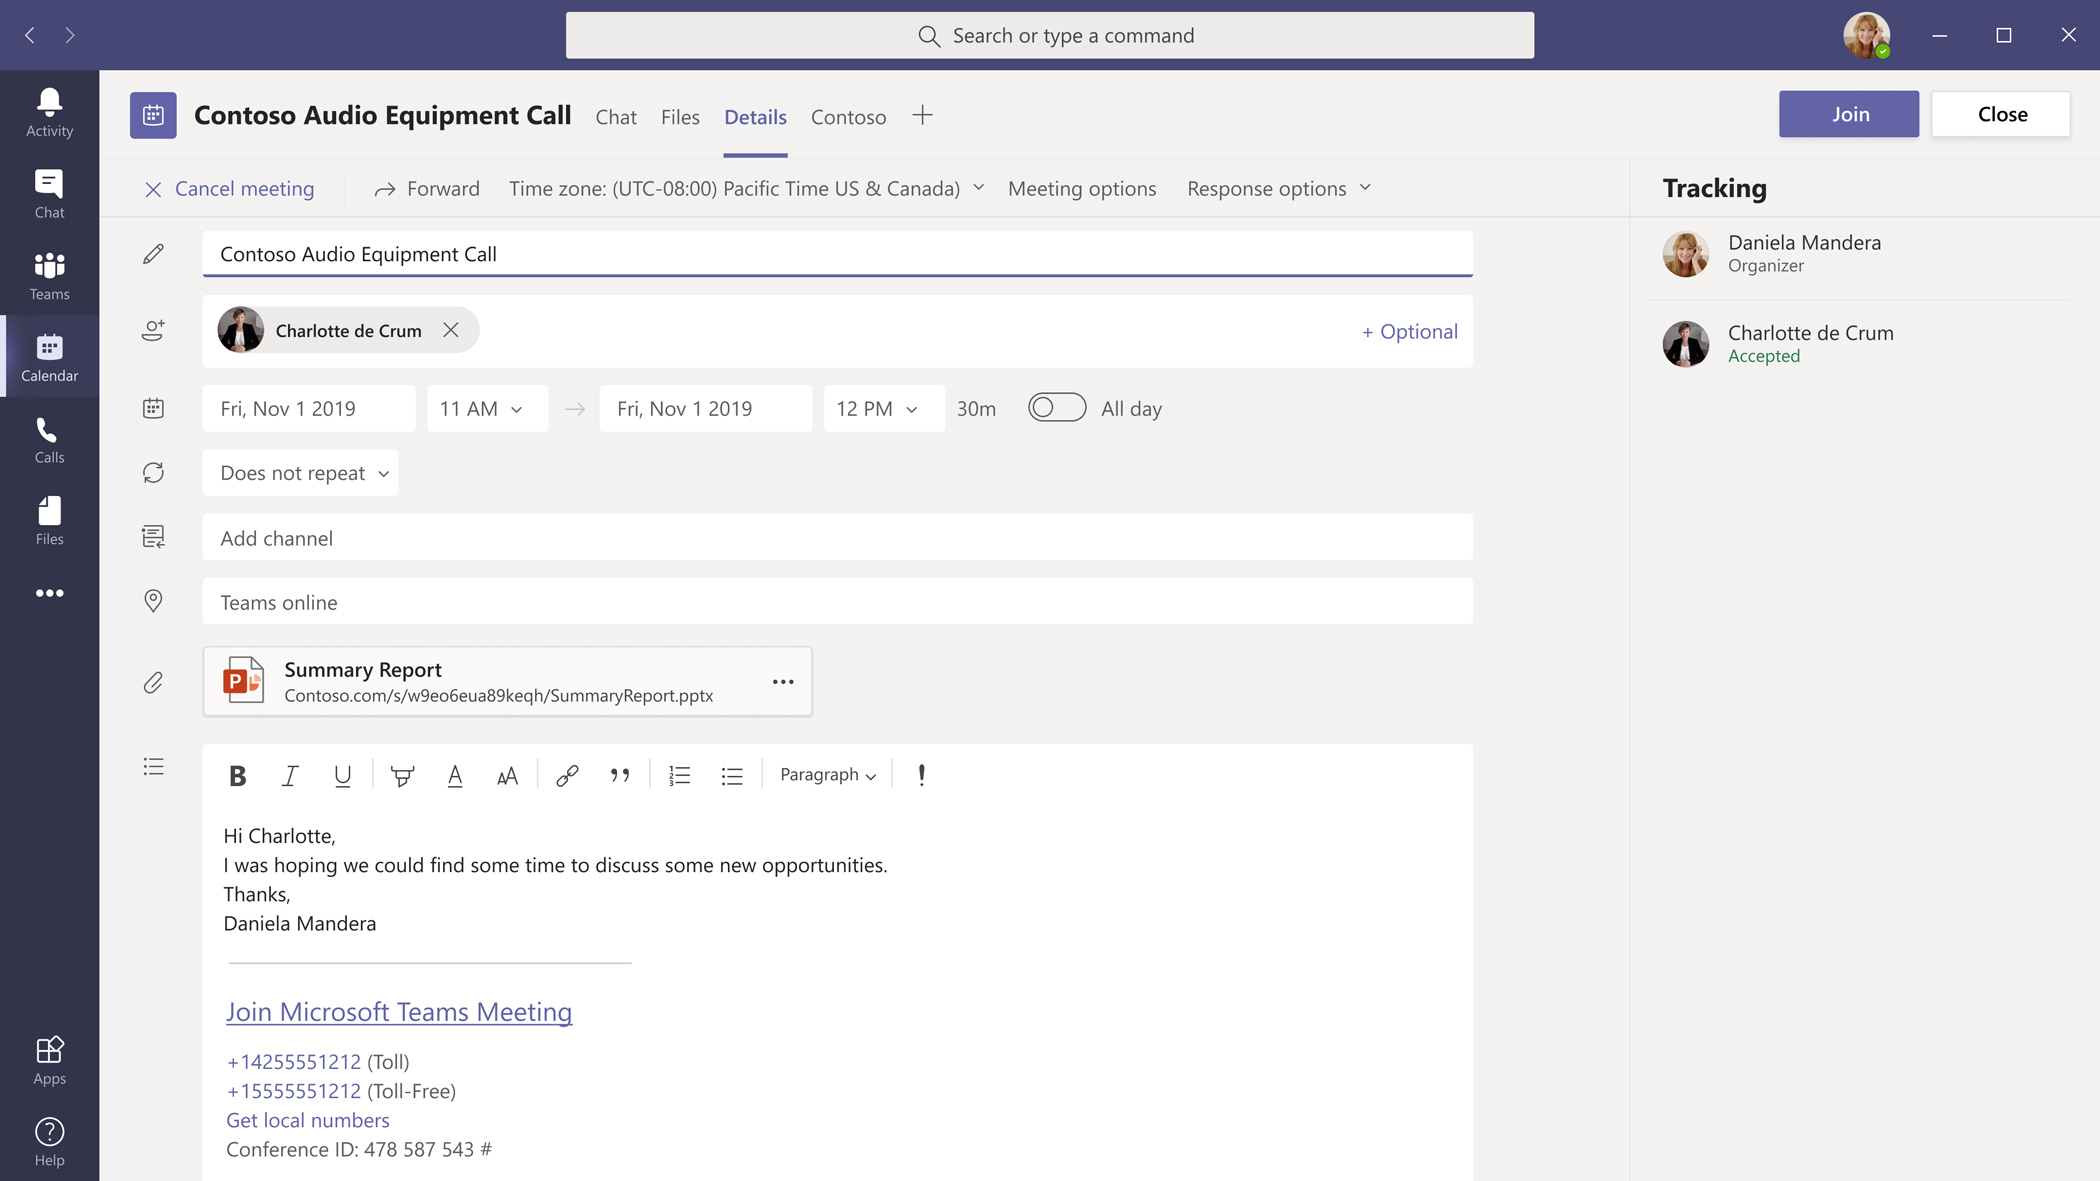 You can schedule and manage meetings in Microsoft Teams.